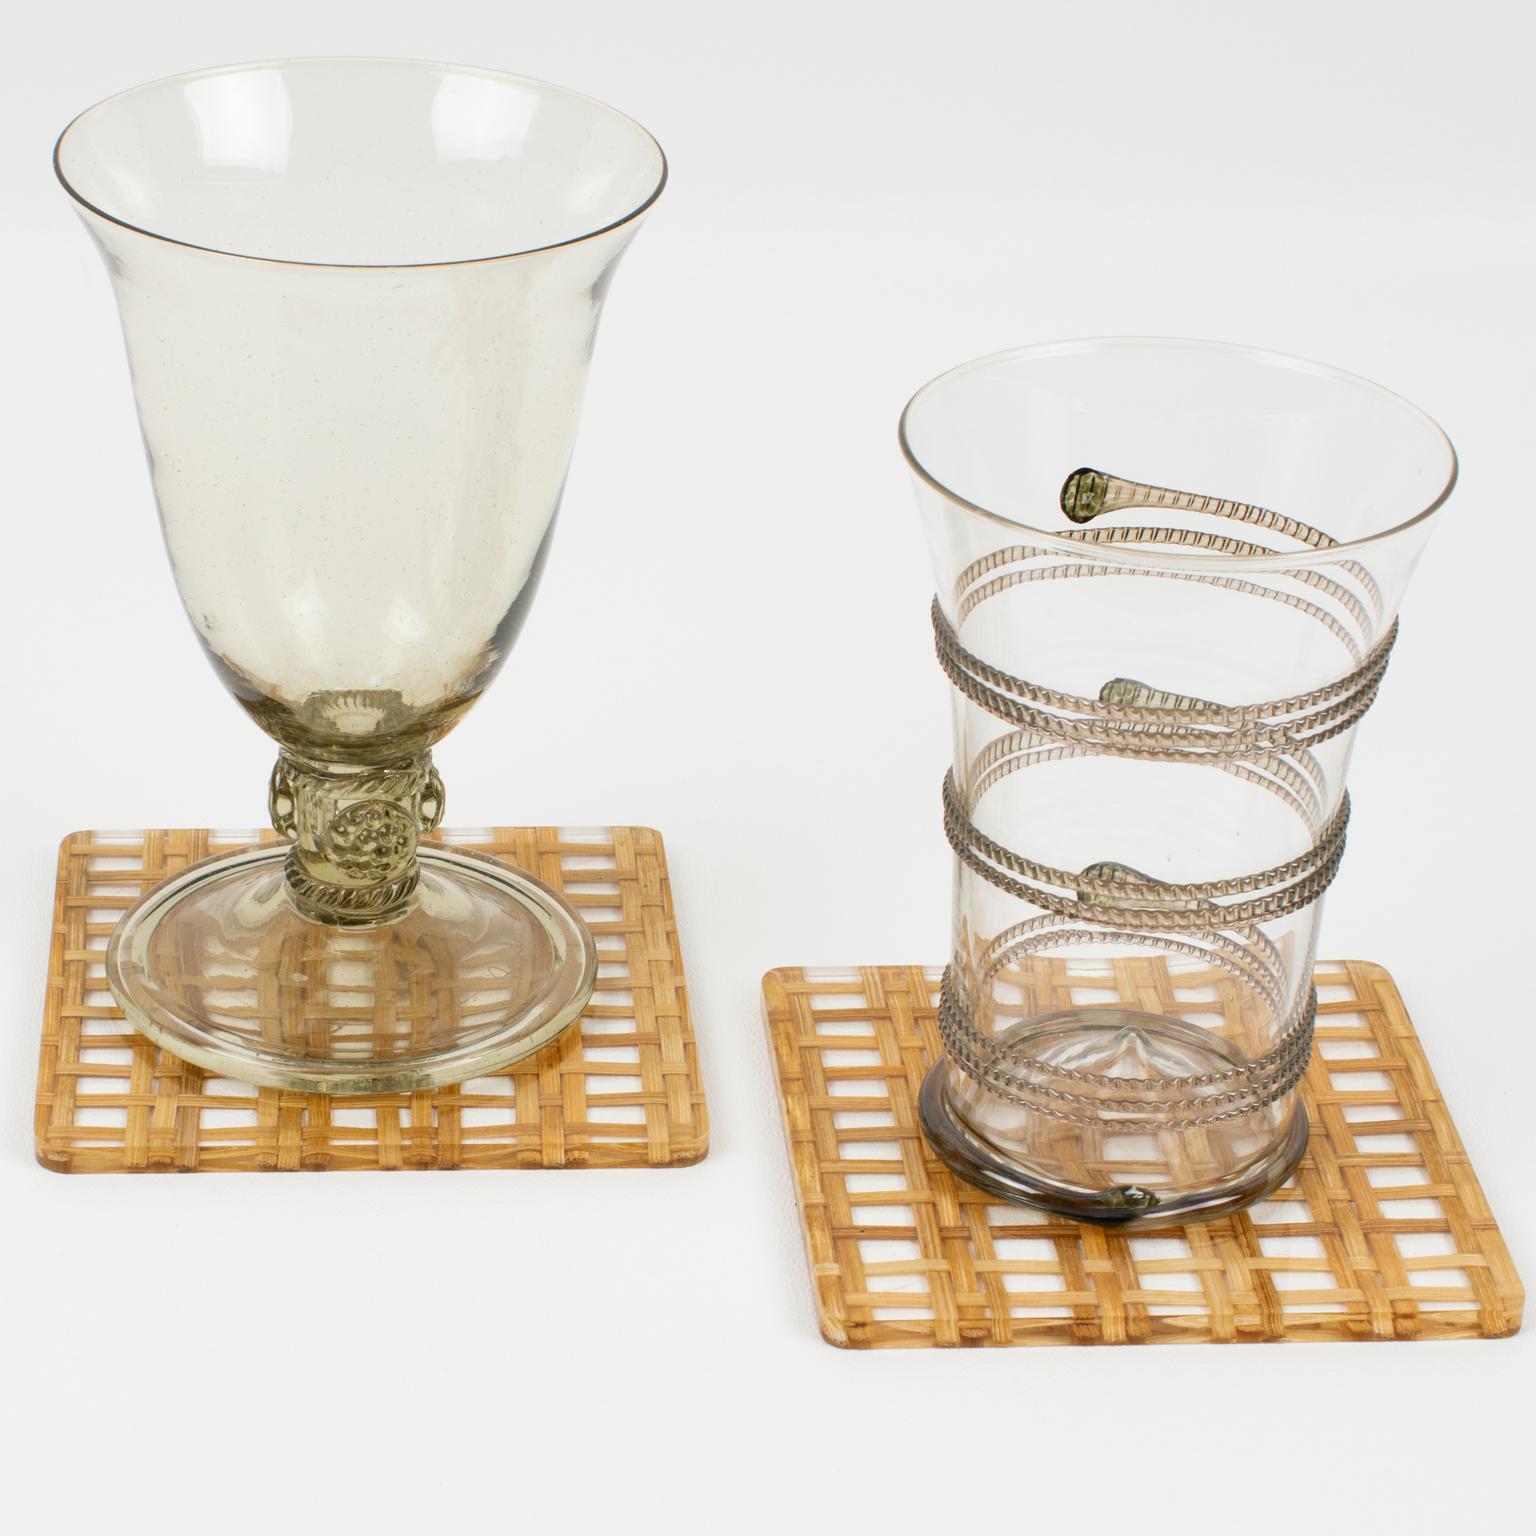 Italian Lucite and Rattan Barware Coasters, set of 5 pieces For Sale